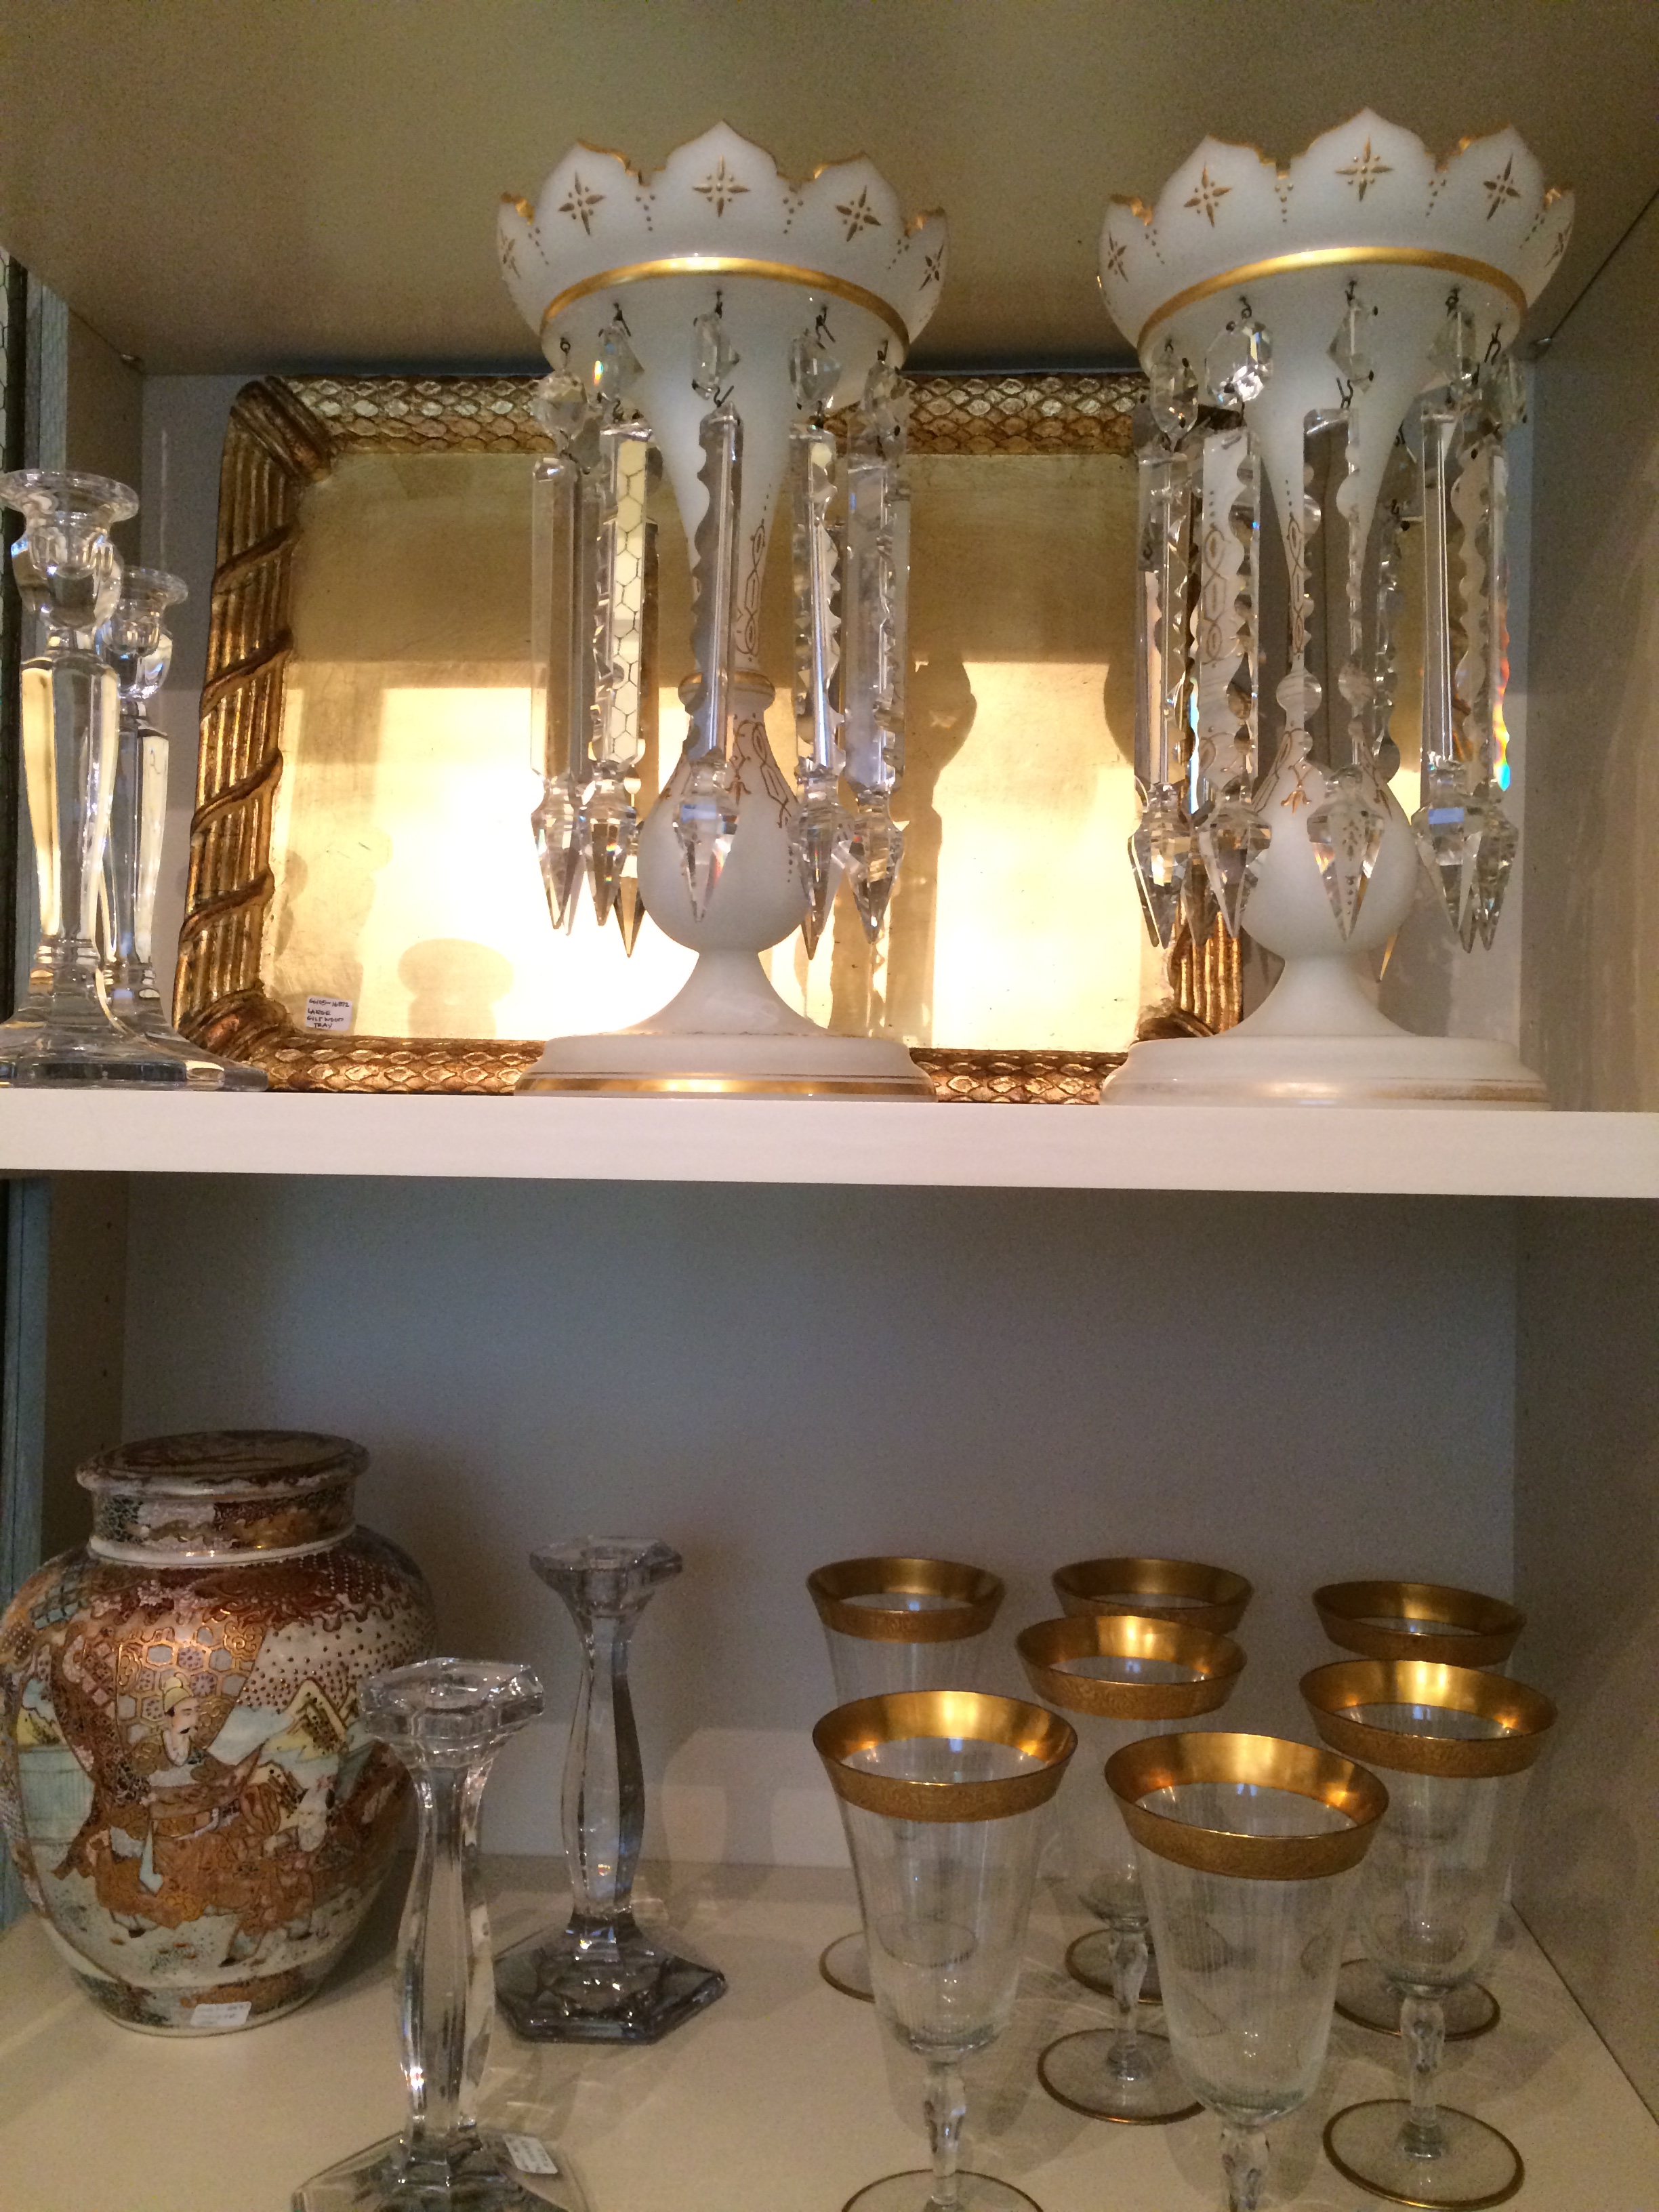 A close up of a cabinet full of lusters and stem ware.